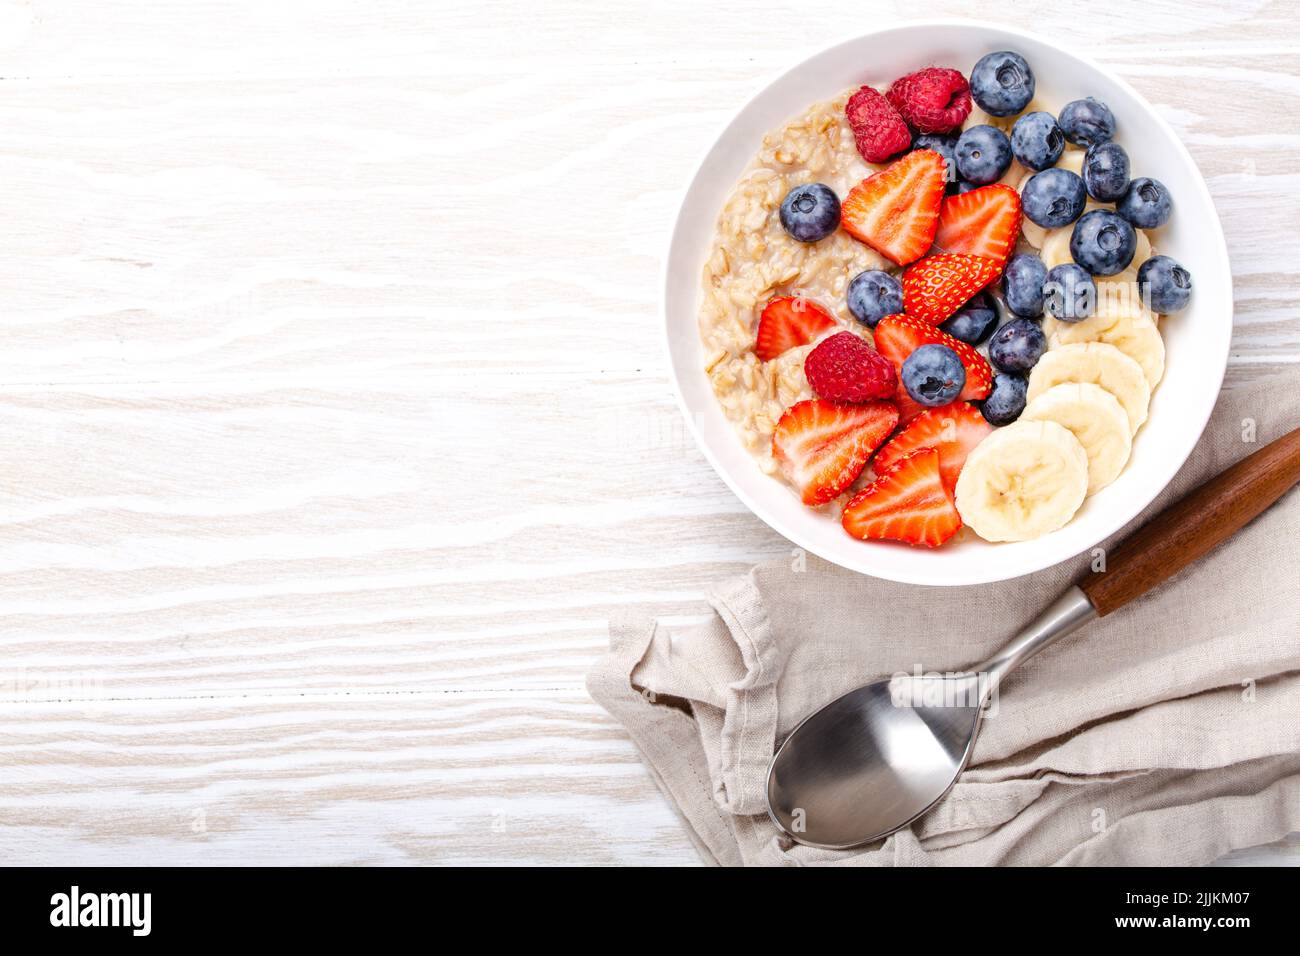 Oatmeal porridge with fruit and berries on white wooden table Stock Photo